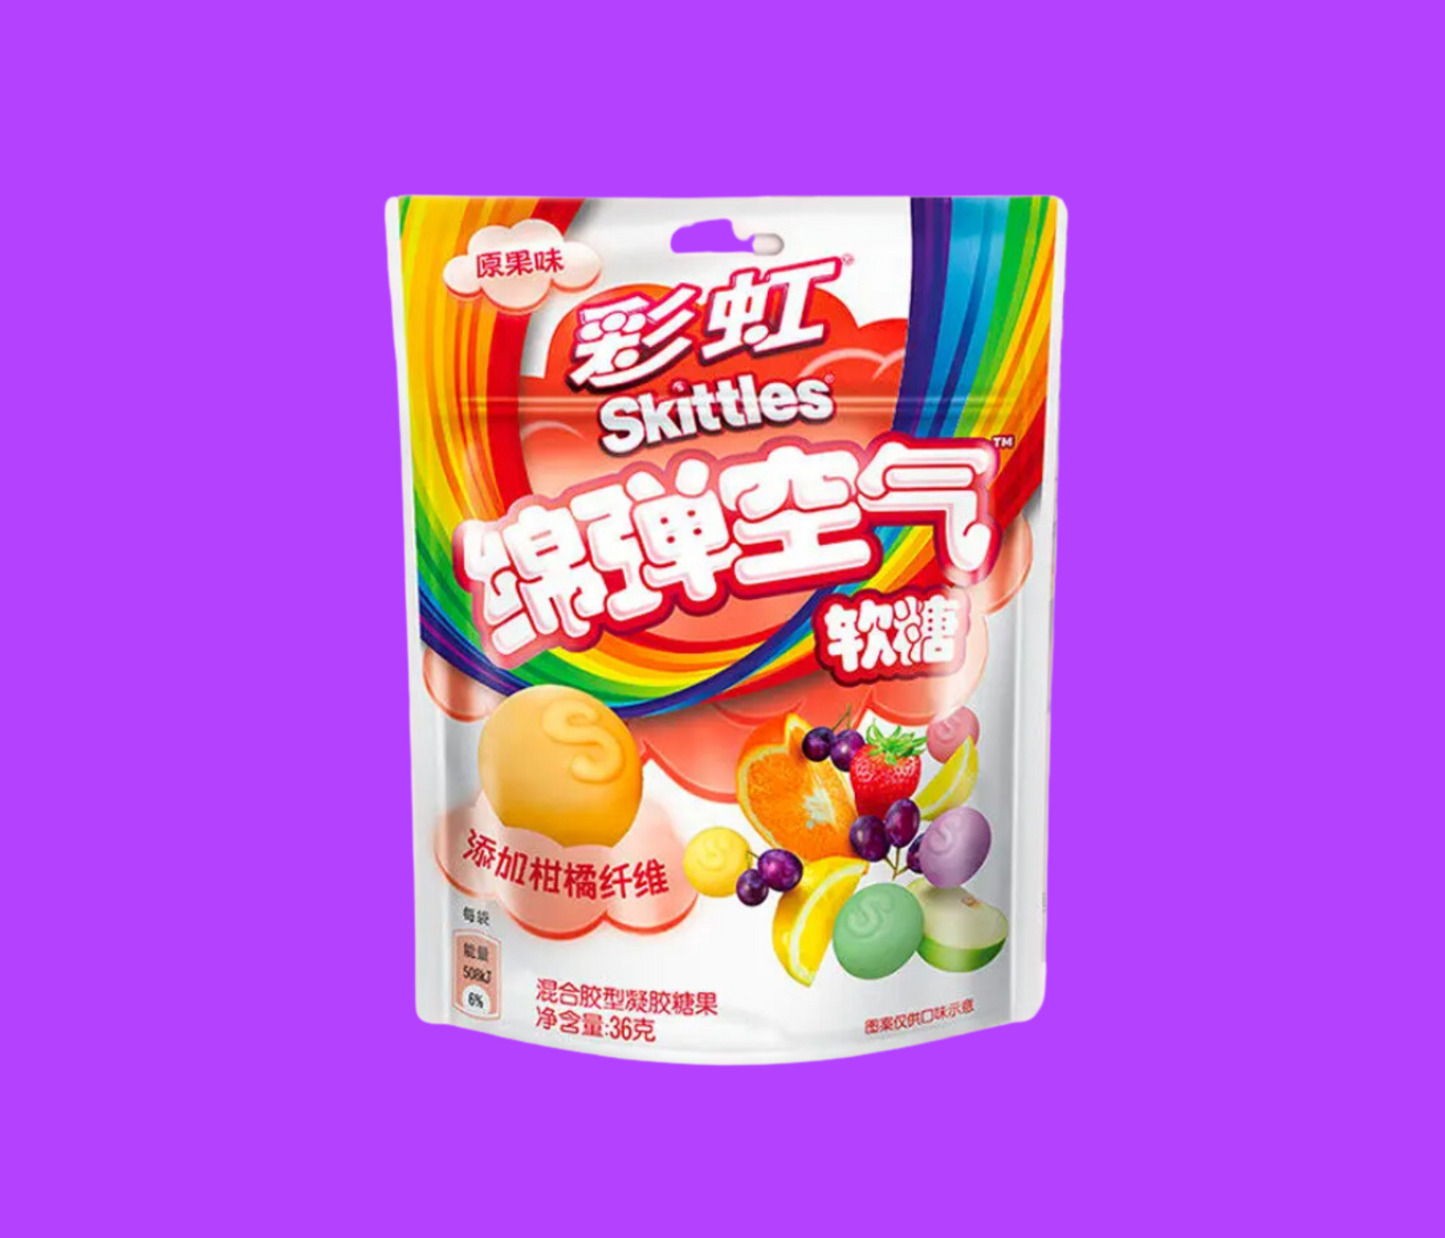 Skittles Air-Floral & Fruity